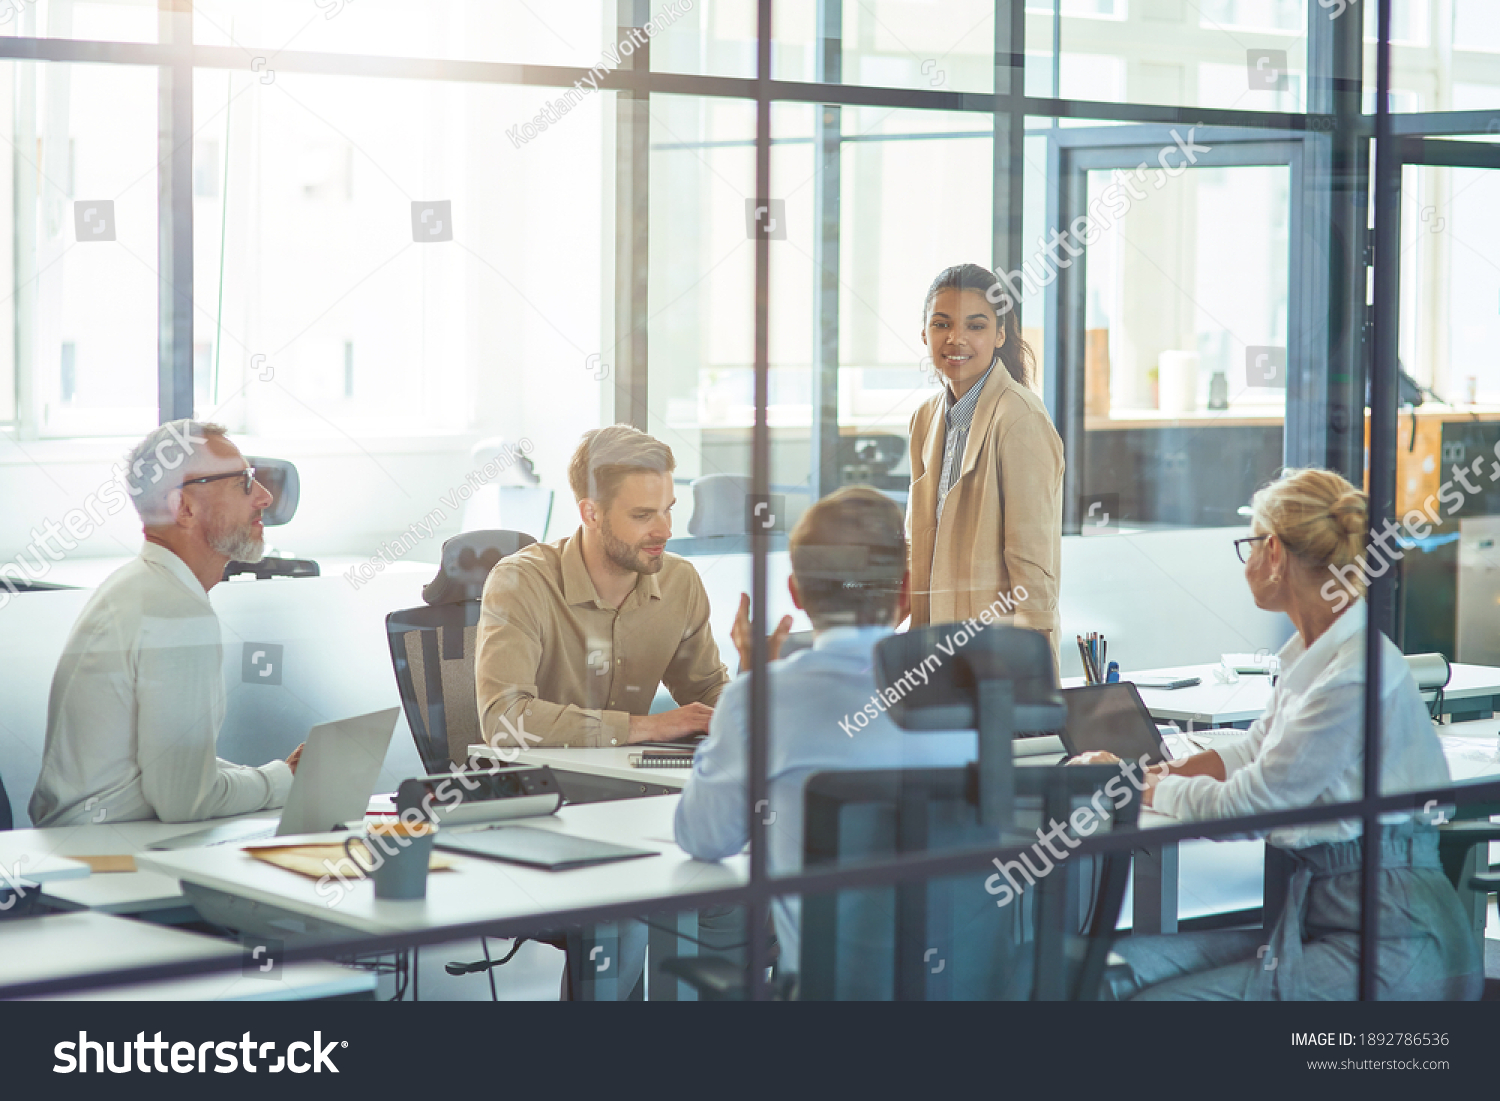 Project Team Work Group Multiracial Business Stock Photo 1892786536 ...